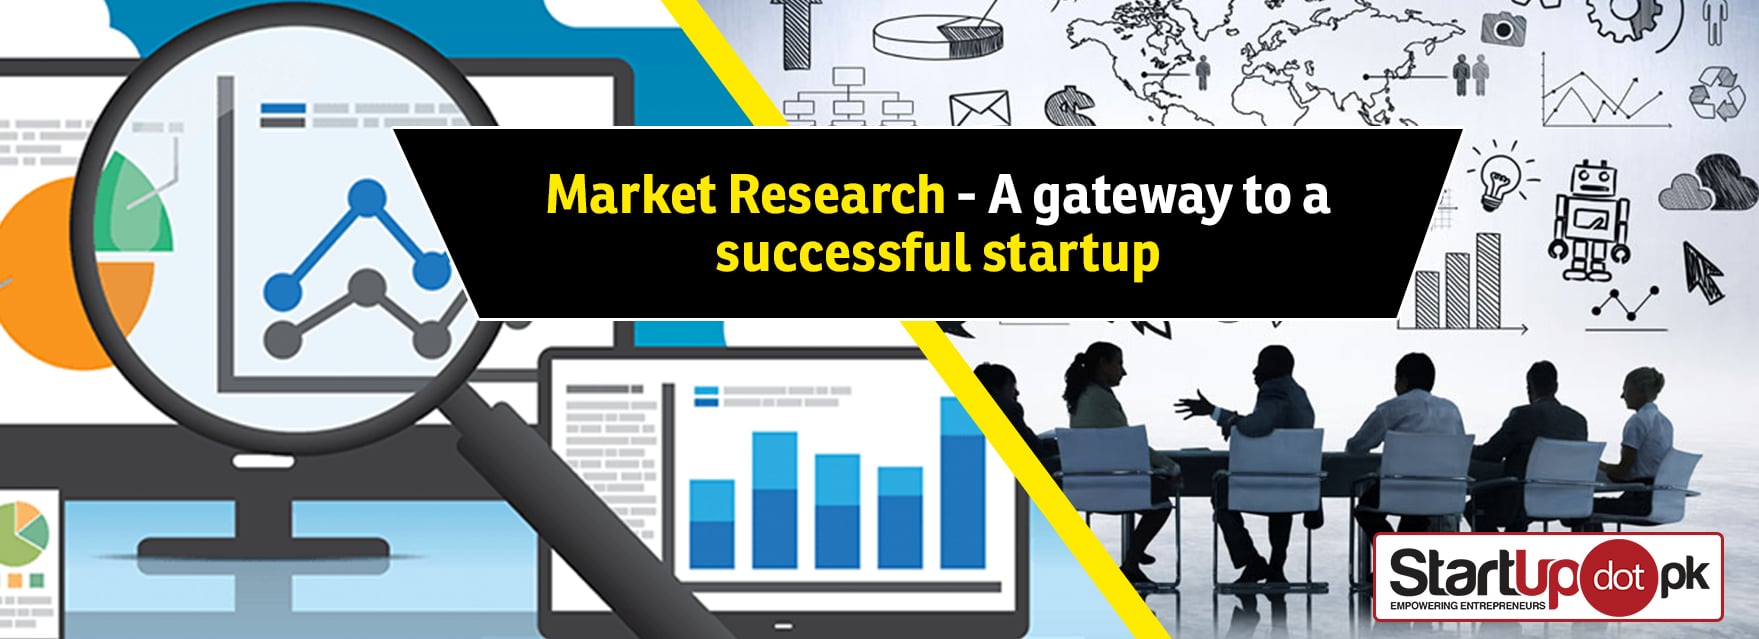 market reserach the gateway to a successful startup